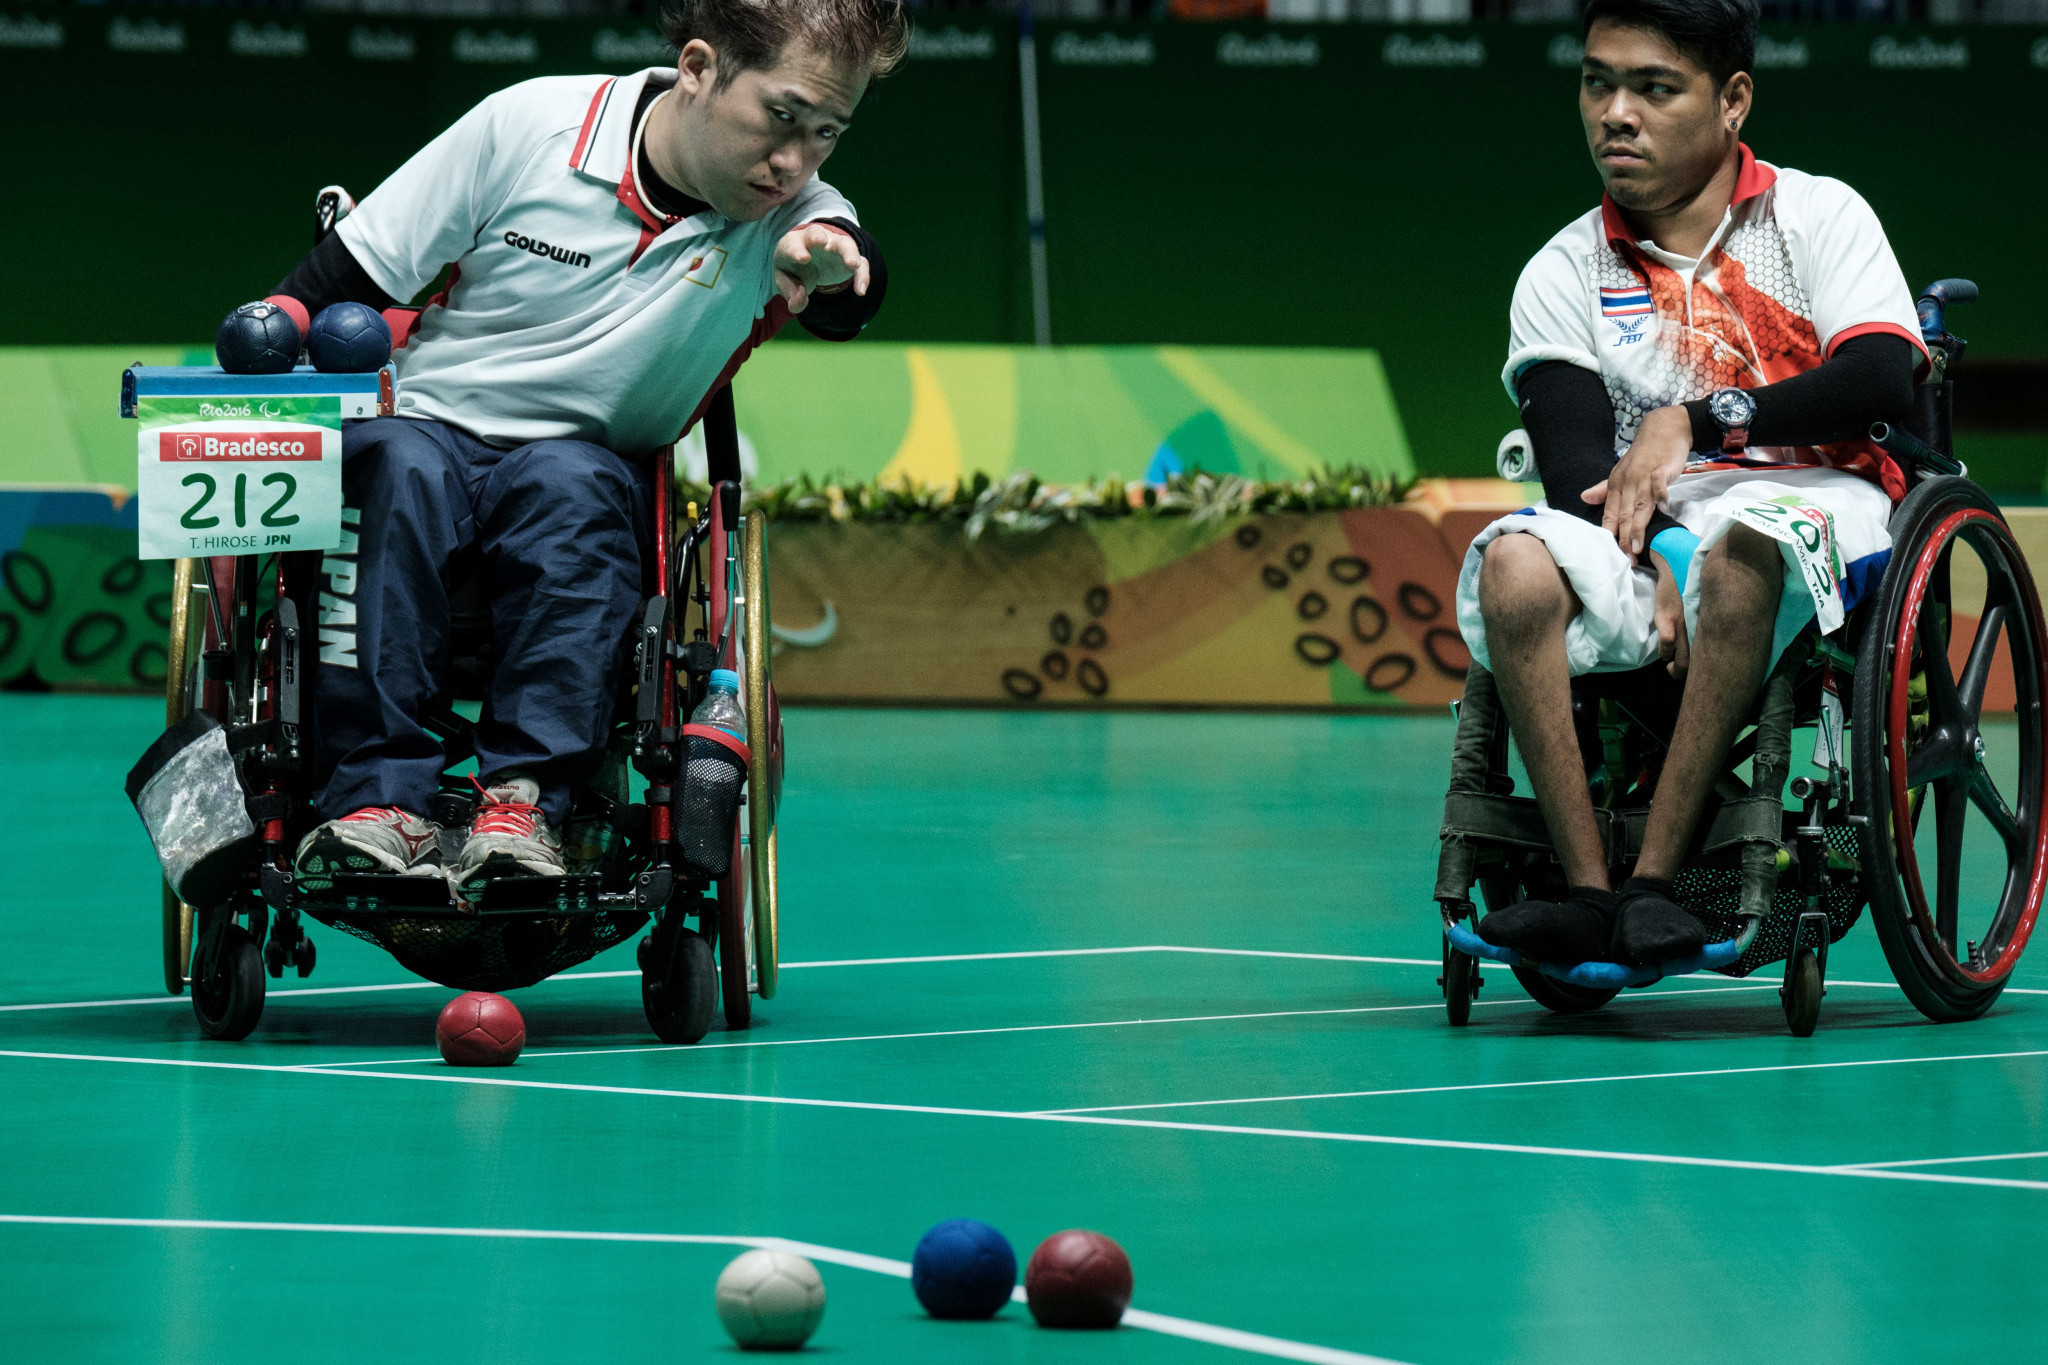 Boccia ball rules were tightened ahead of the Rio 2016 Paralympics ©Getty Images